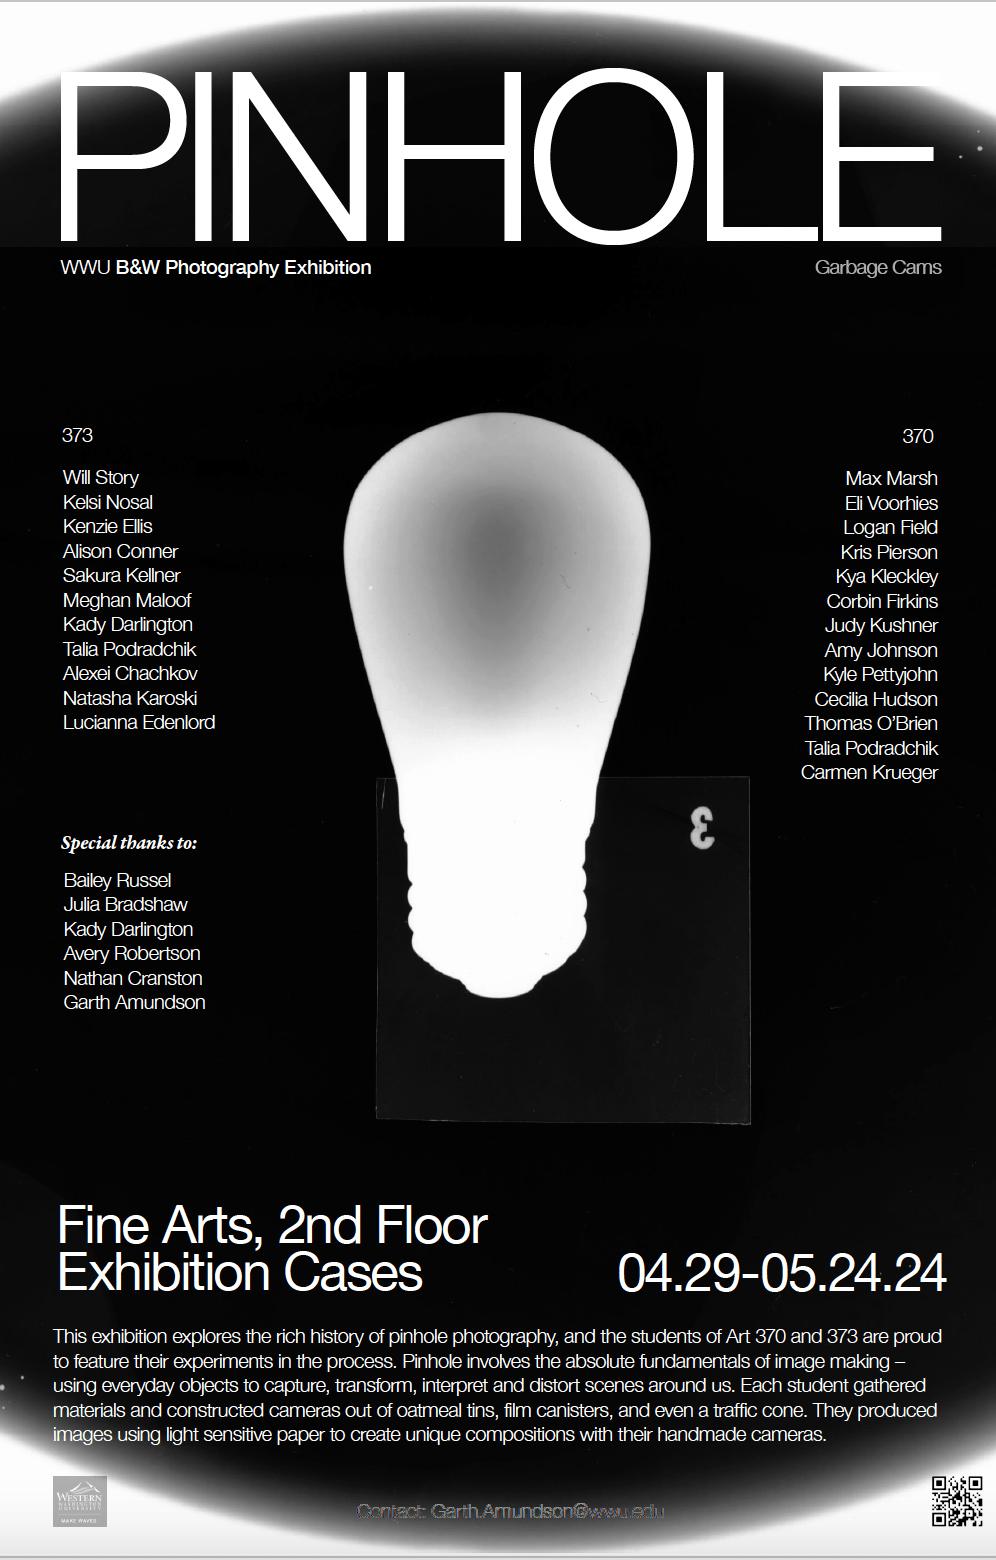 The poster for the exhibition reads "pinhole, WWU B&W Photography Exhibition, Garbage Cams". It lists all the students involved in the show, the location, the special thanks and the synapsis featured at the start of this post. The posters main image is of a lightbulb  all white -- created in a darkroom by laying a lightbulb over exposed photo paper.